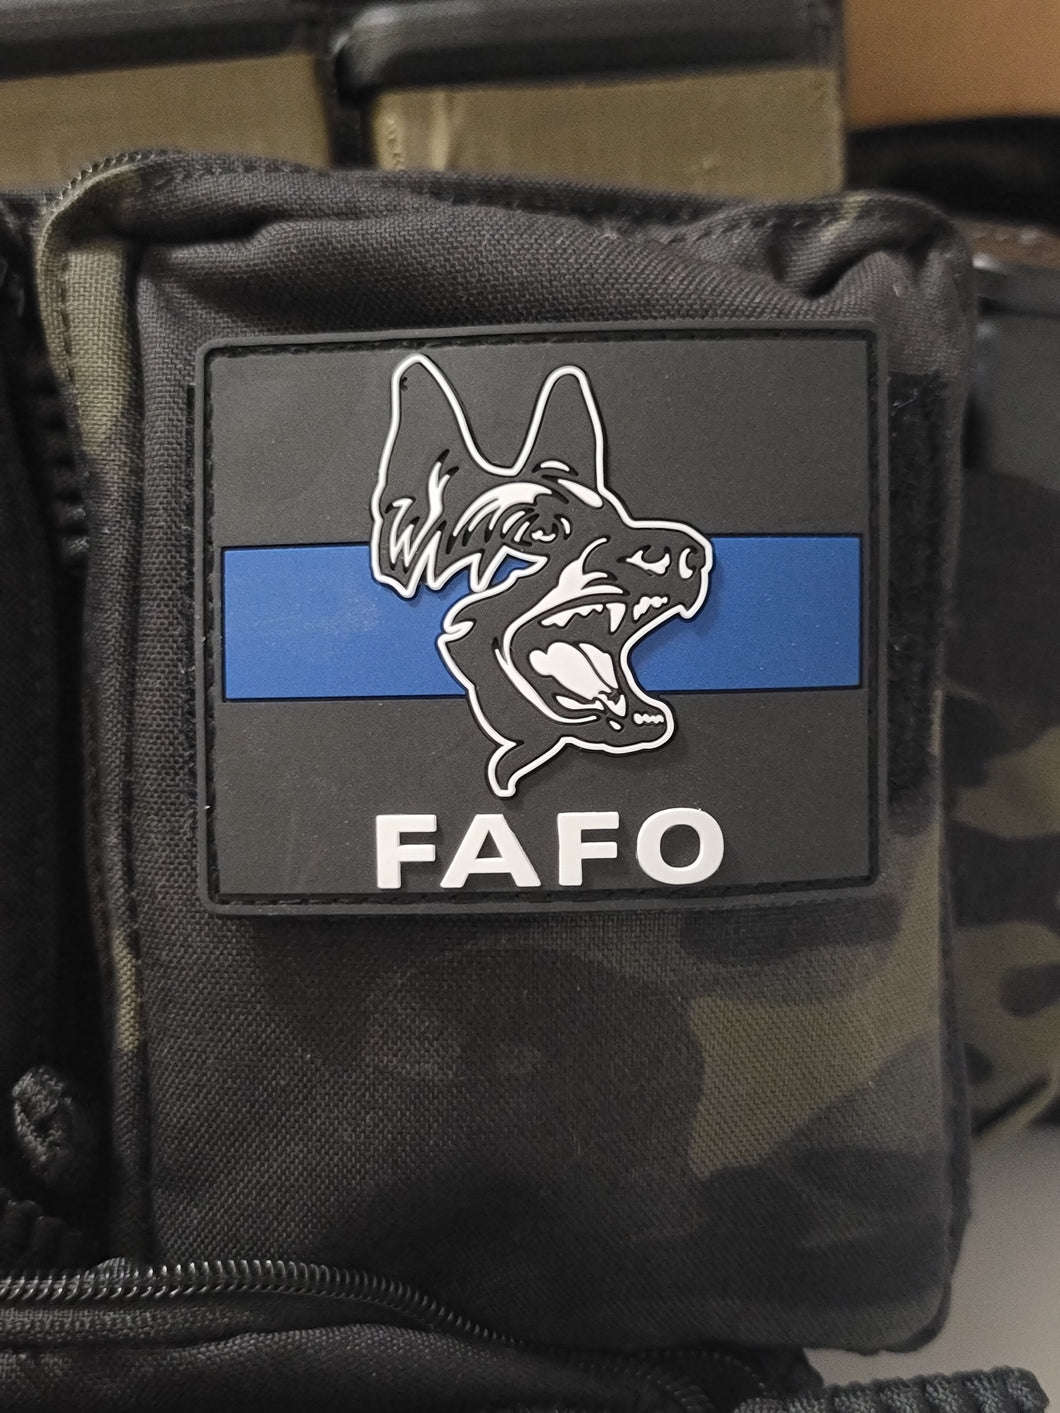 FAFO K9 Thin Blue Line Patch